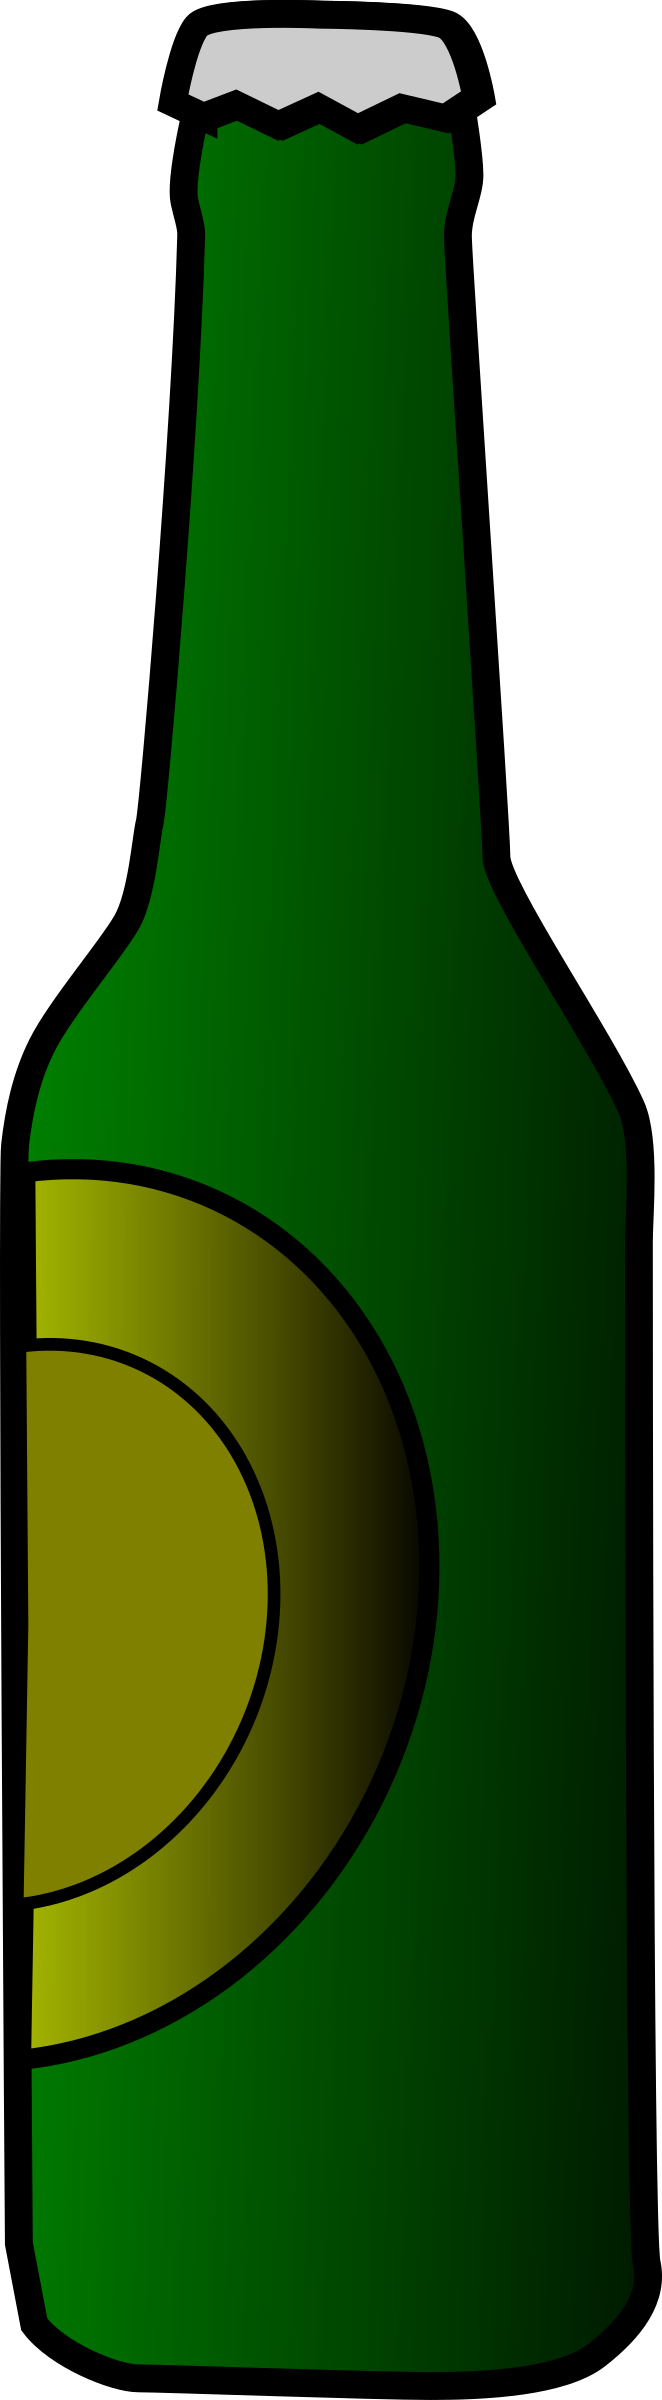 beer bottle clipart vector - Clipground